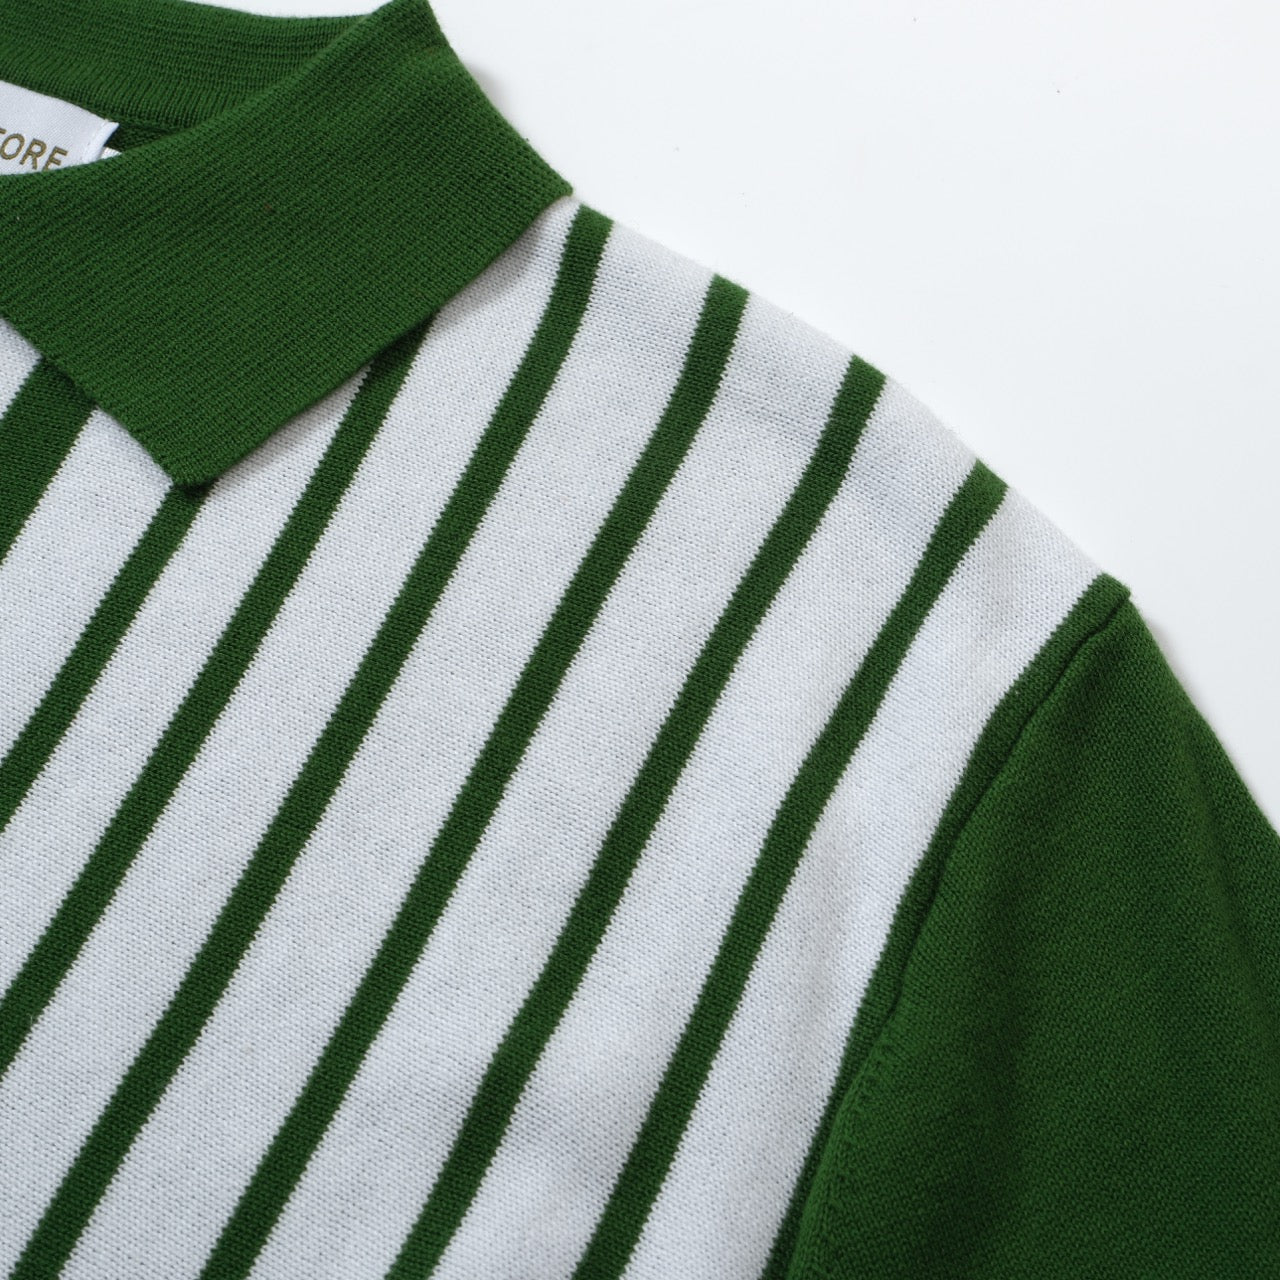 OXKNIT Men Vintage Clothing 1960s Mod Style Casual Vertical stripes Dark Green Polo Knitted Retro Wear